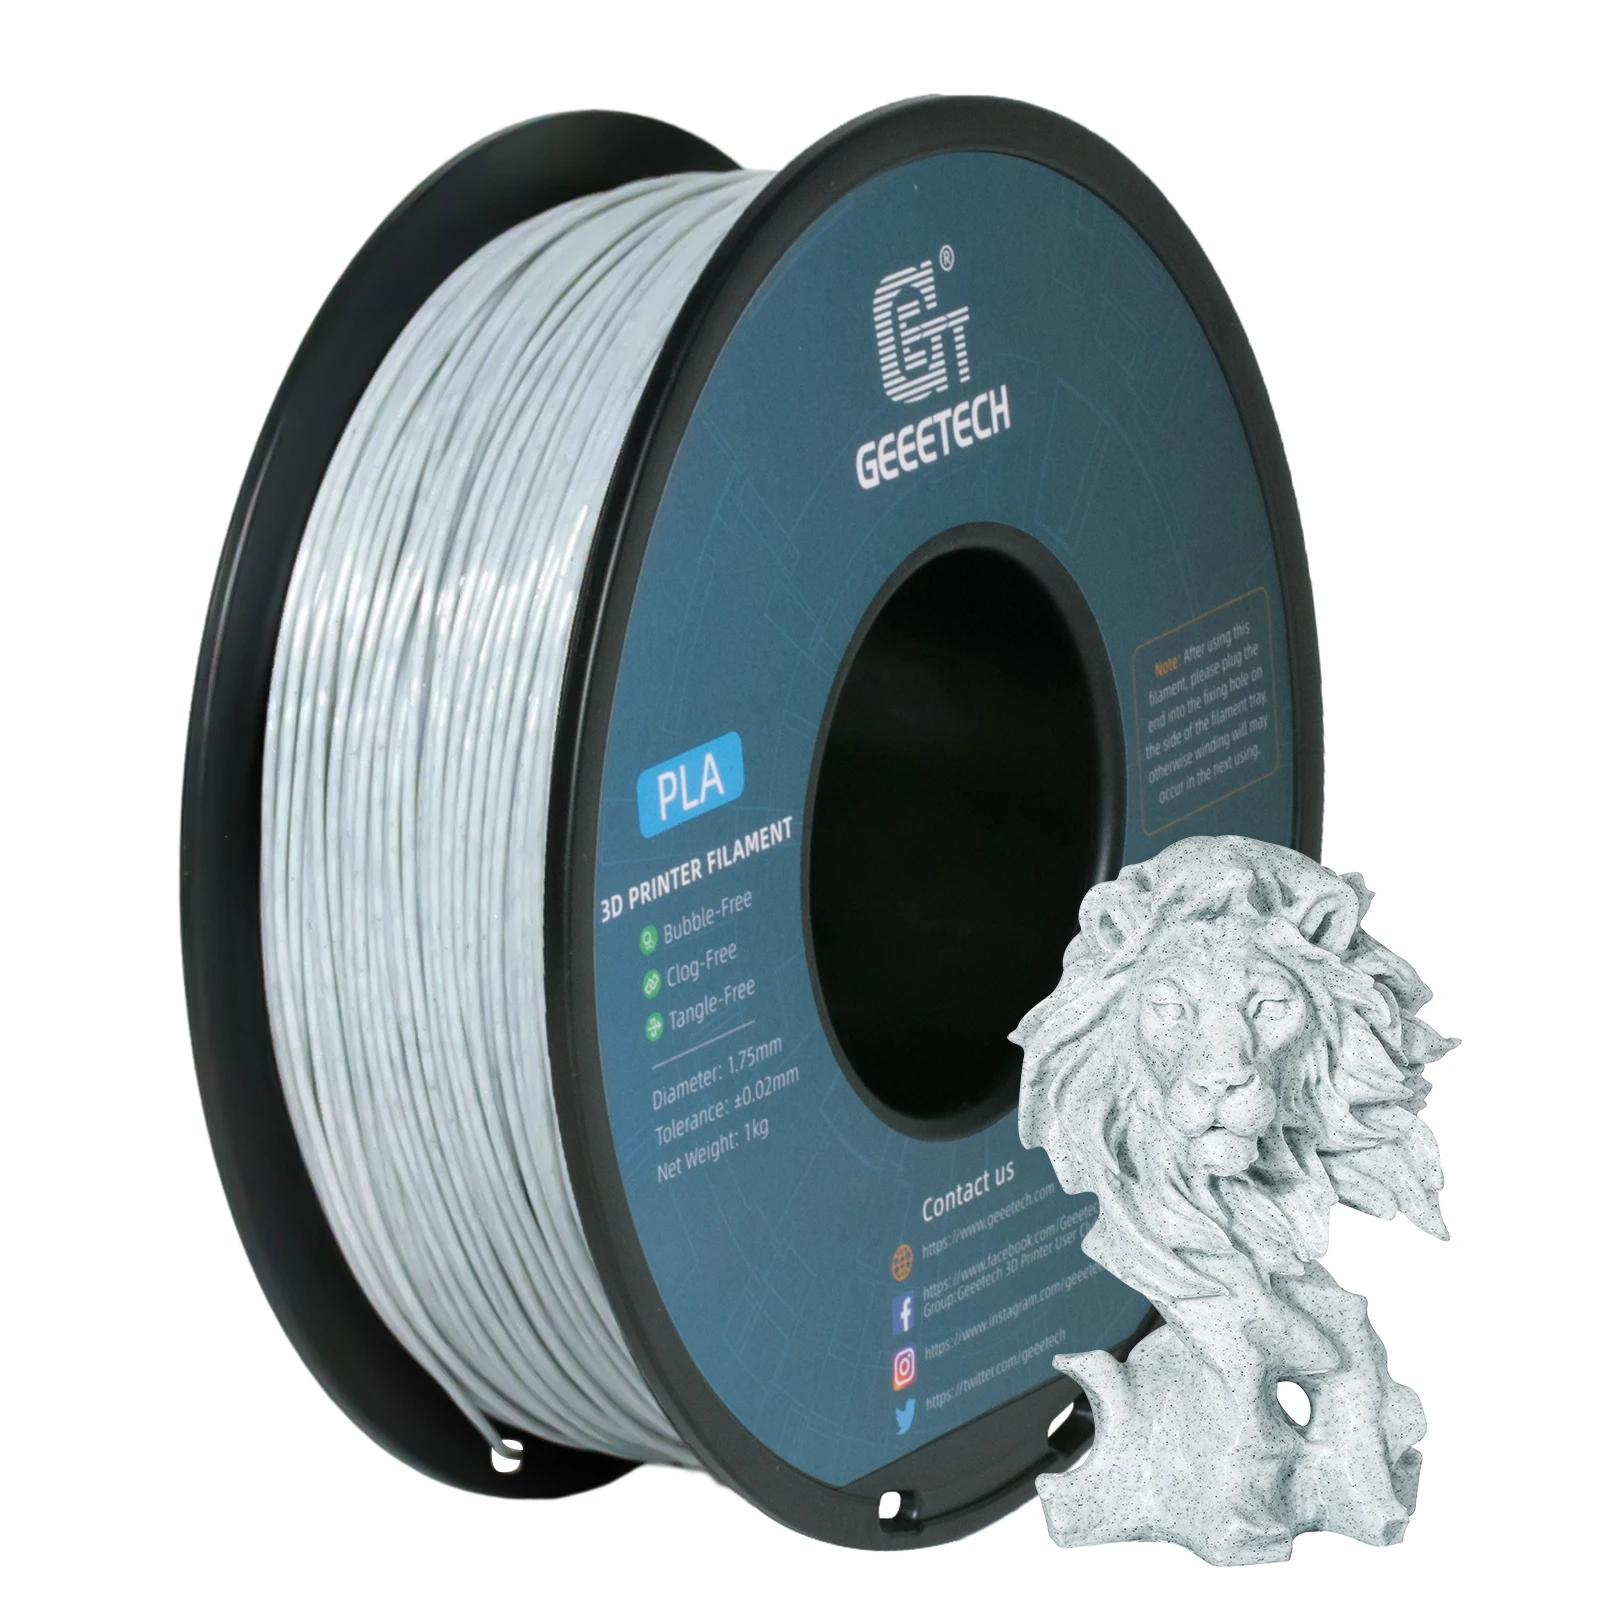 

Geeetech Like Marble PLA 3D Printer Filament Plastic 1kg 1.75mm,Tangle-Free, 3d printing wire materialsvacuum packaging